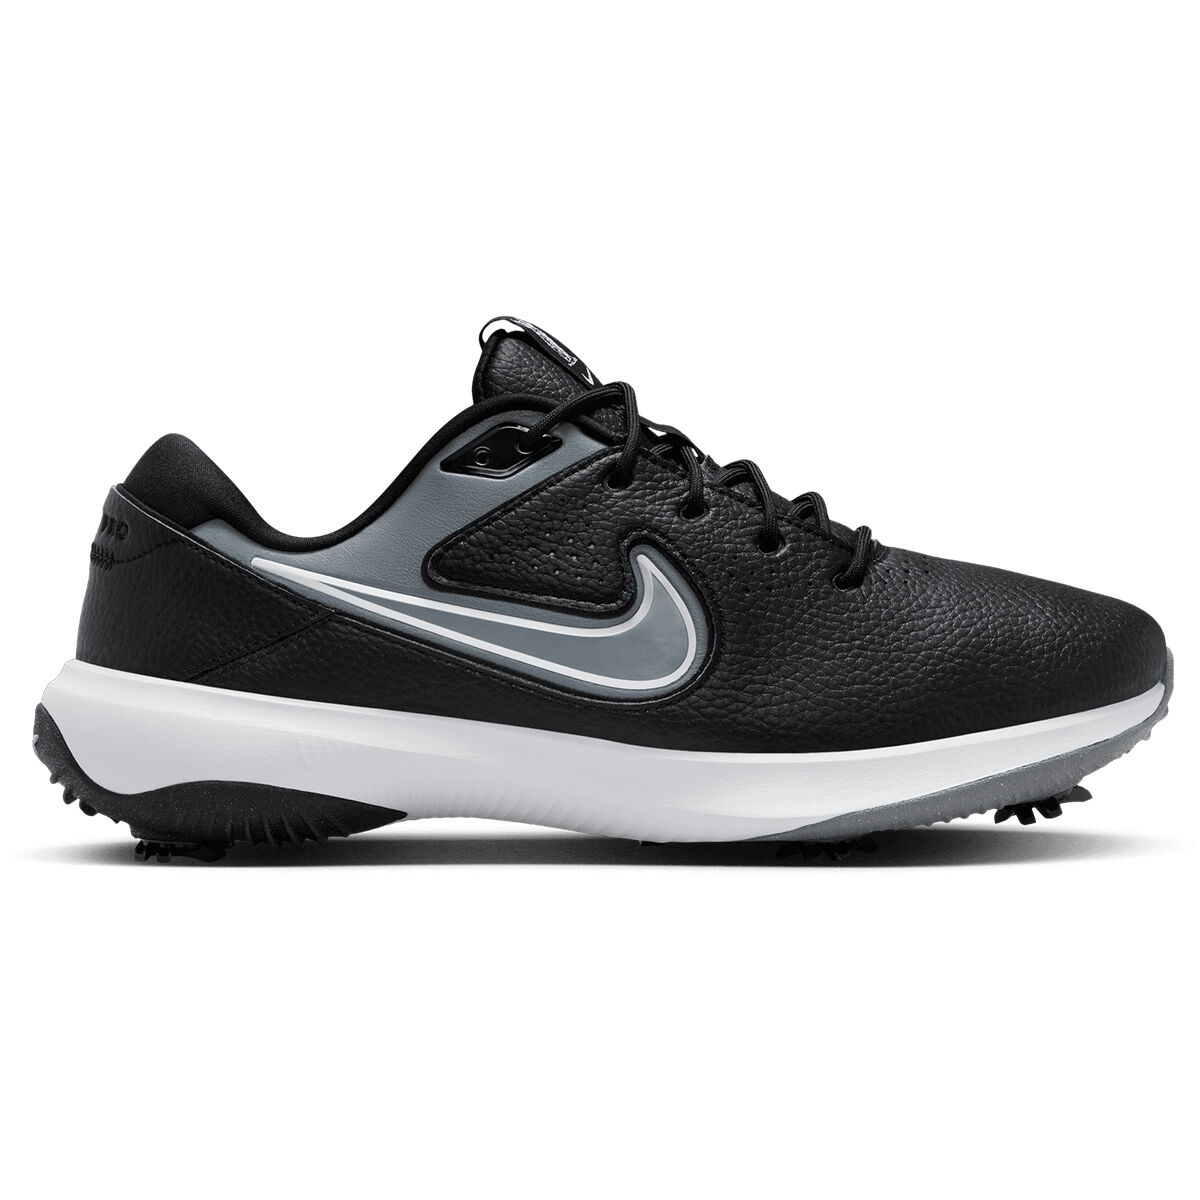 Nike Men’s Victory Pro 3 Waterproof Spiked Golf Shoes, Mens, Black/white/cool grey, 8 | American Golf